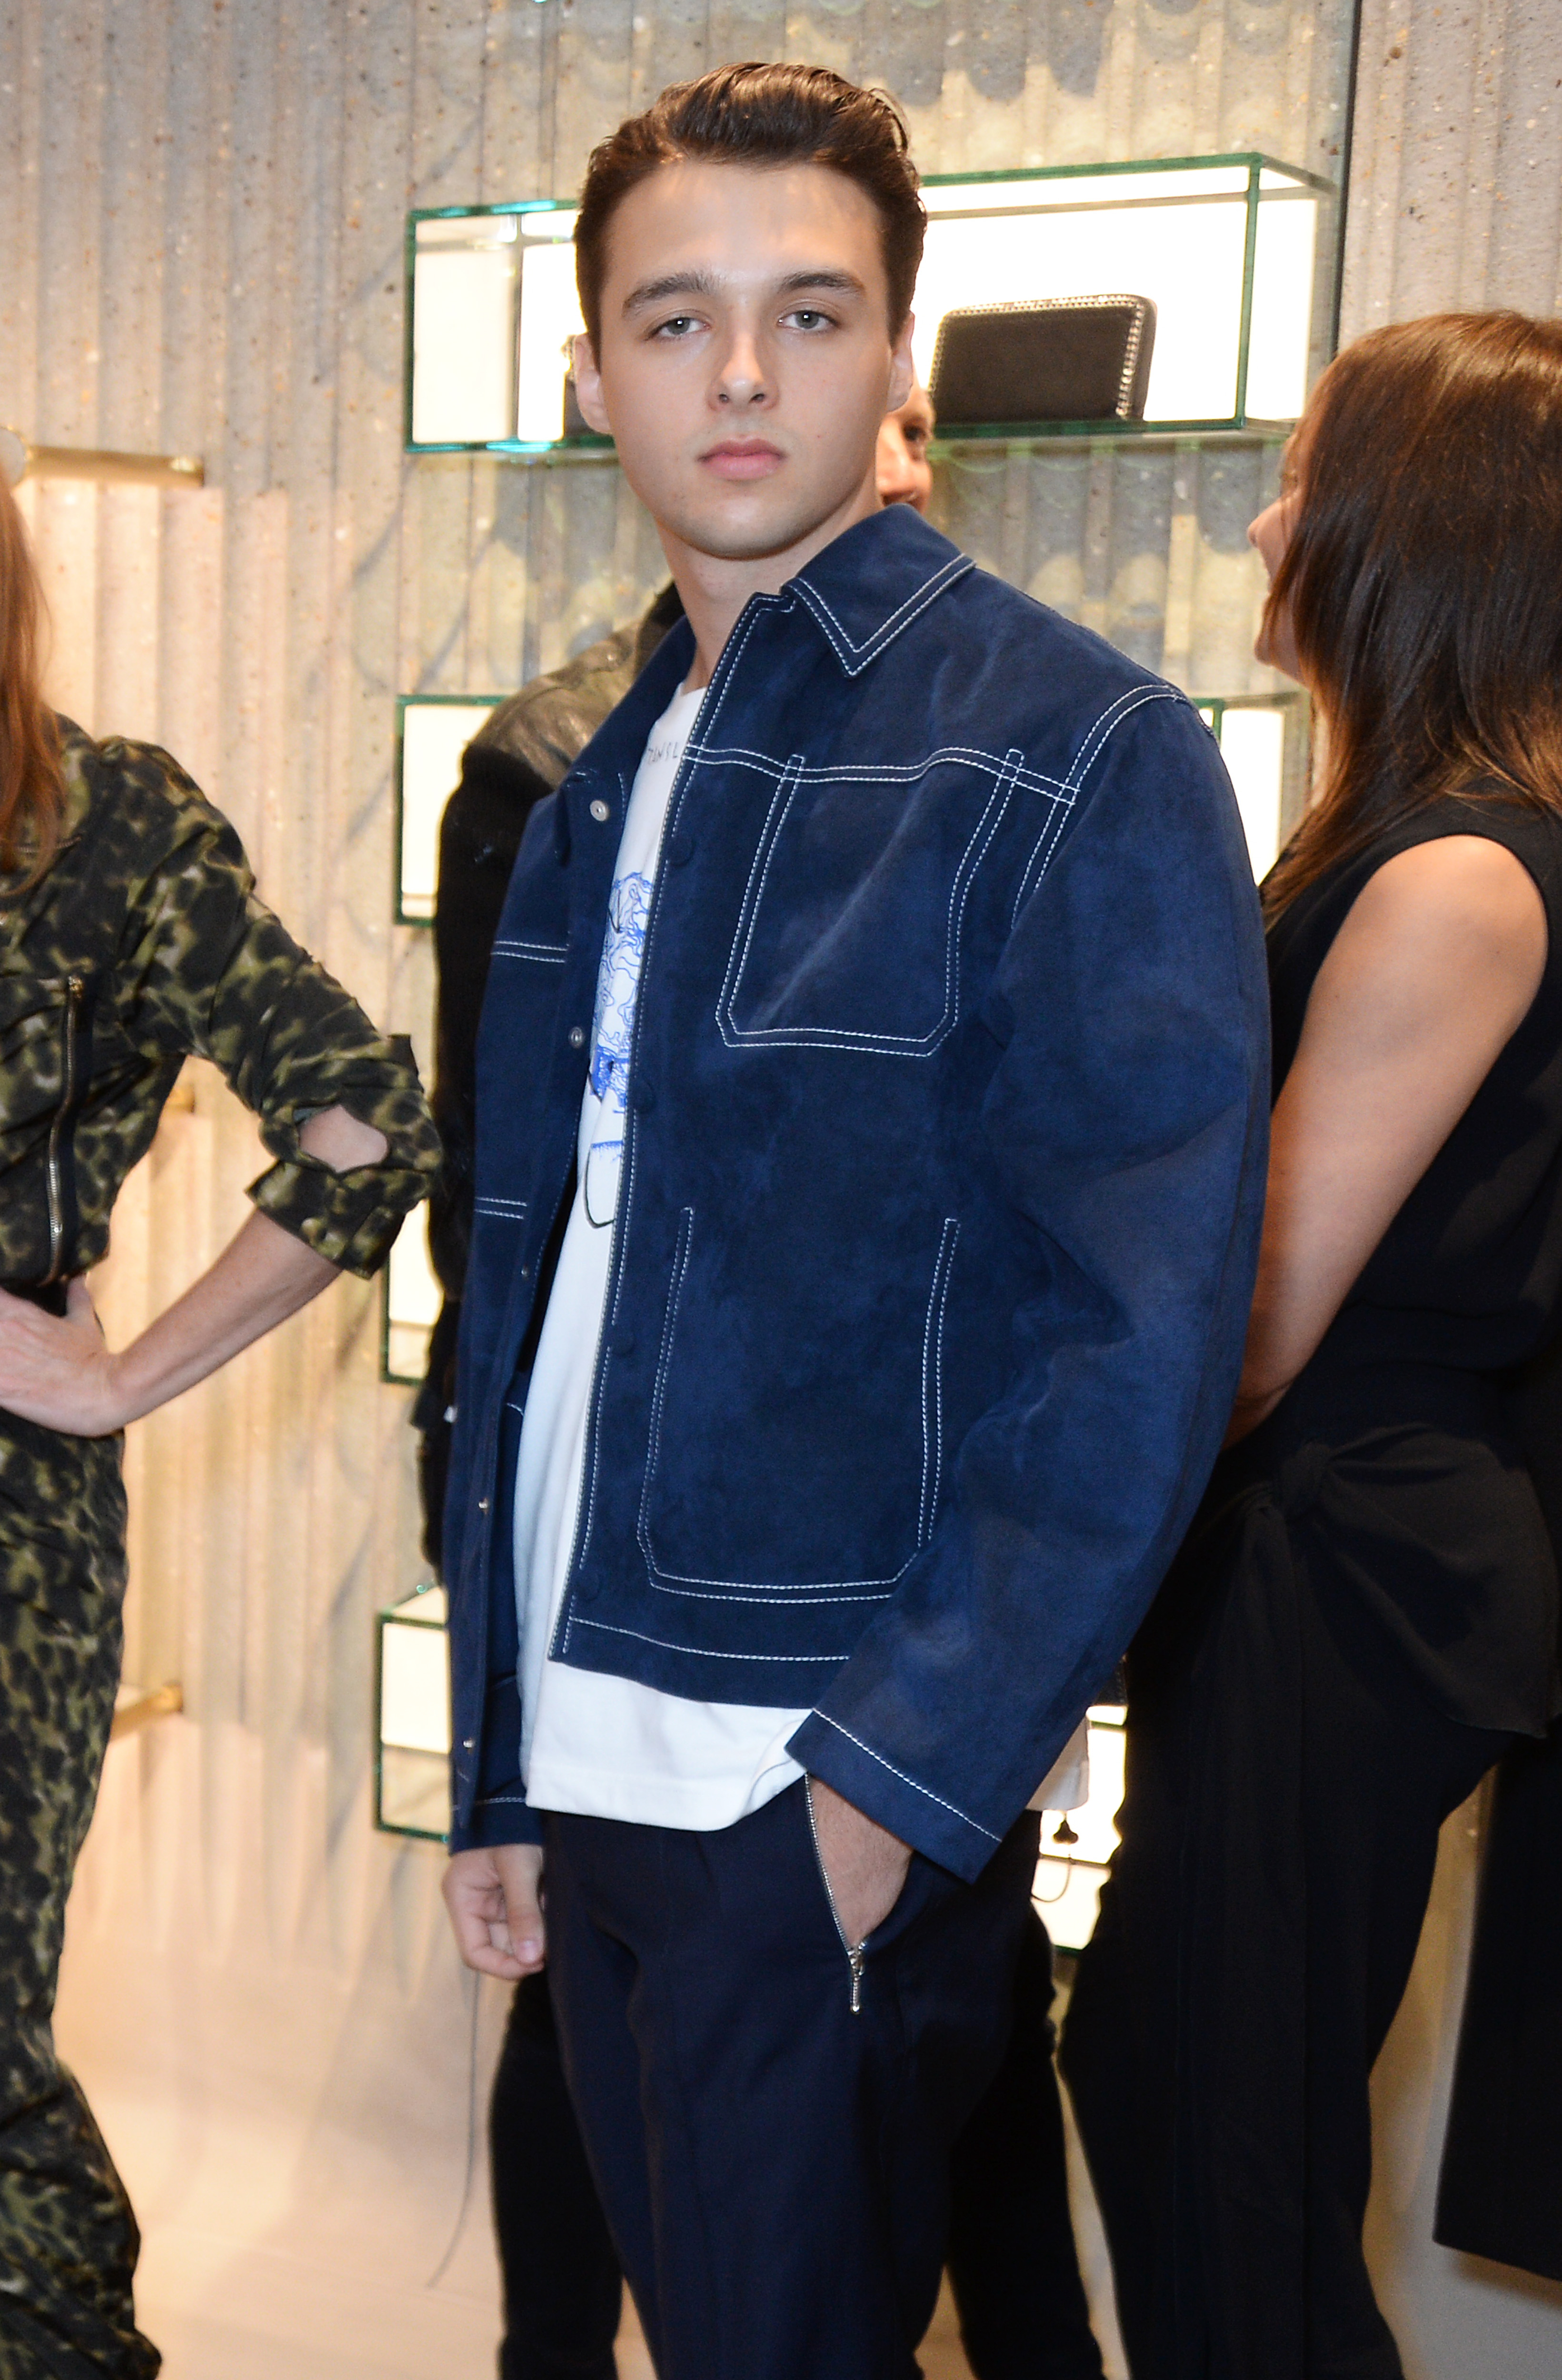 Arthur Donald was present at the launch of the Stella McCartney Global flagship store on Old Bond Street, which took place on June 12, 2018, in London, England. | Source: Getty Images